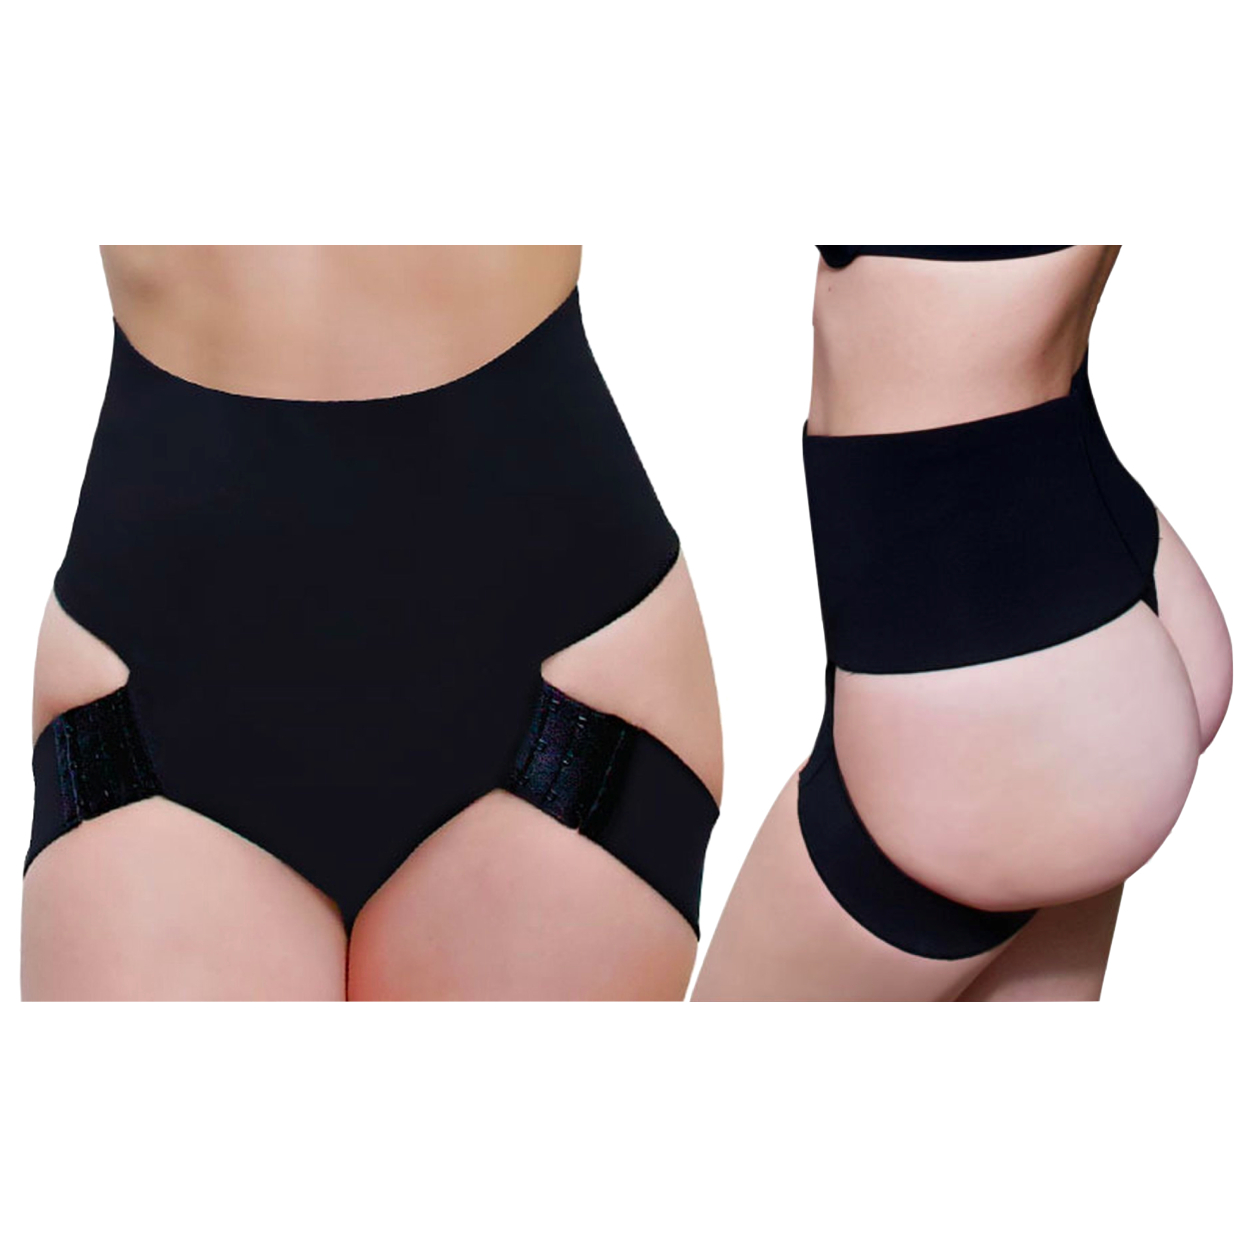 Adjustable Butt Booster Control Shaper In Regular And Plus Sizes - Black, 2X